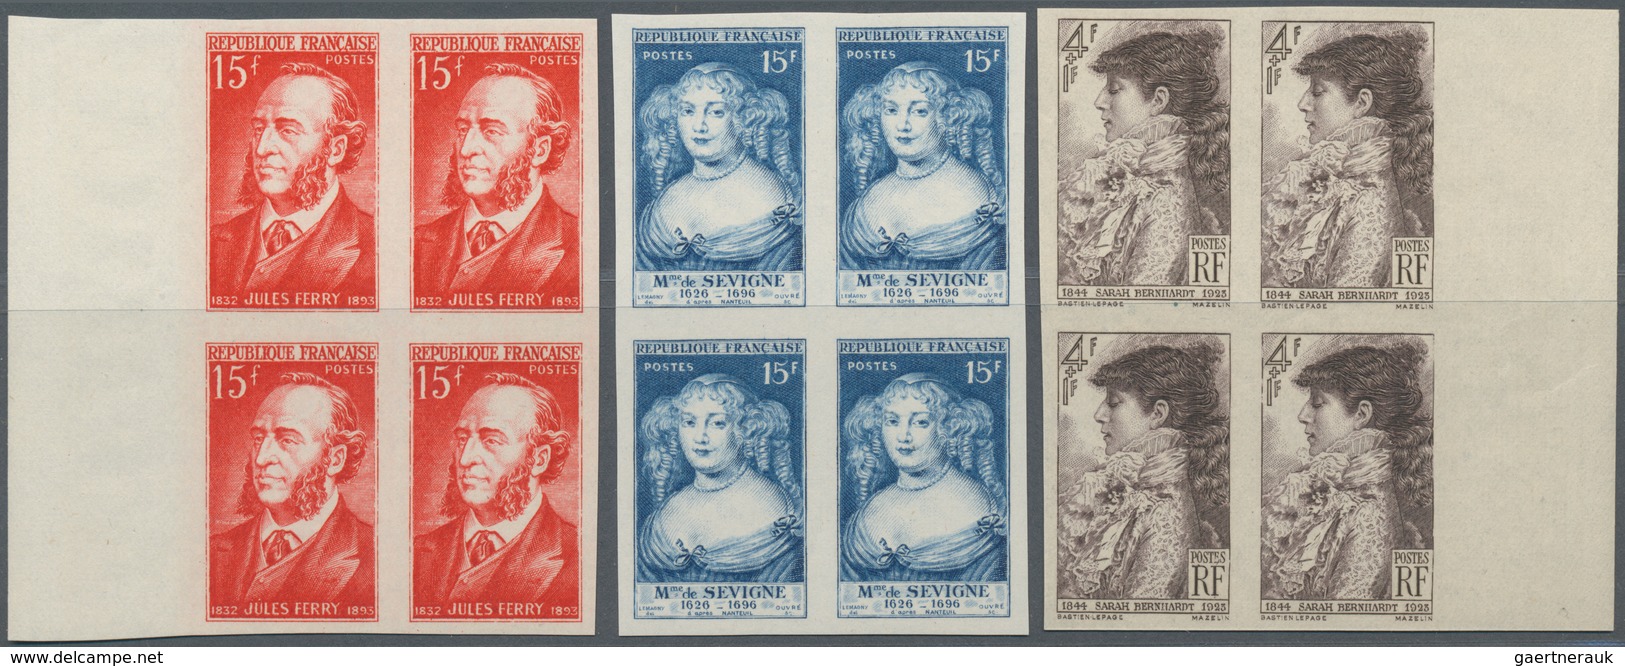 Frankreich: 1943/1974, incredible dealer stock on stockcards with approx. 2.300 IMPERFORATE stamps a